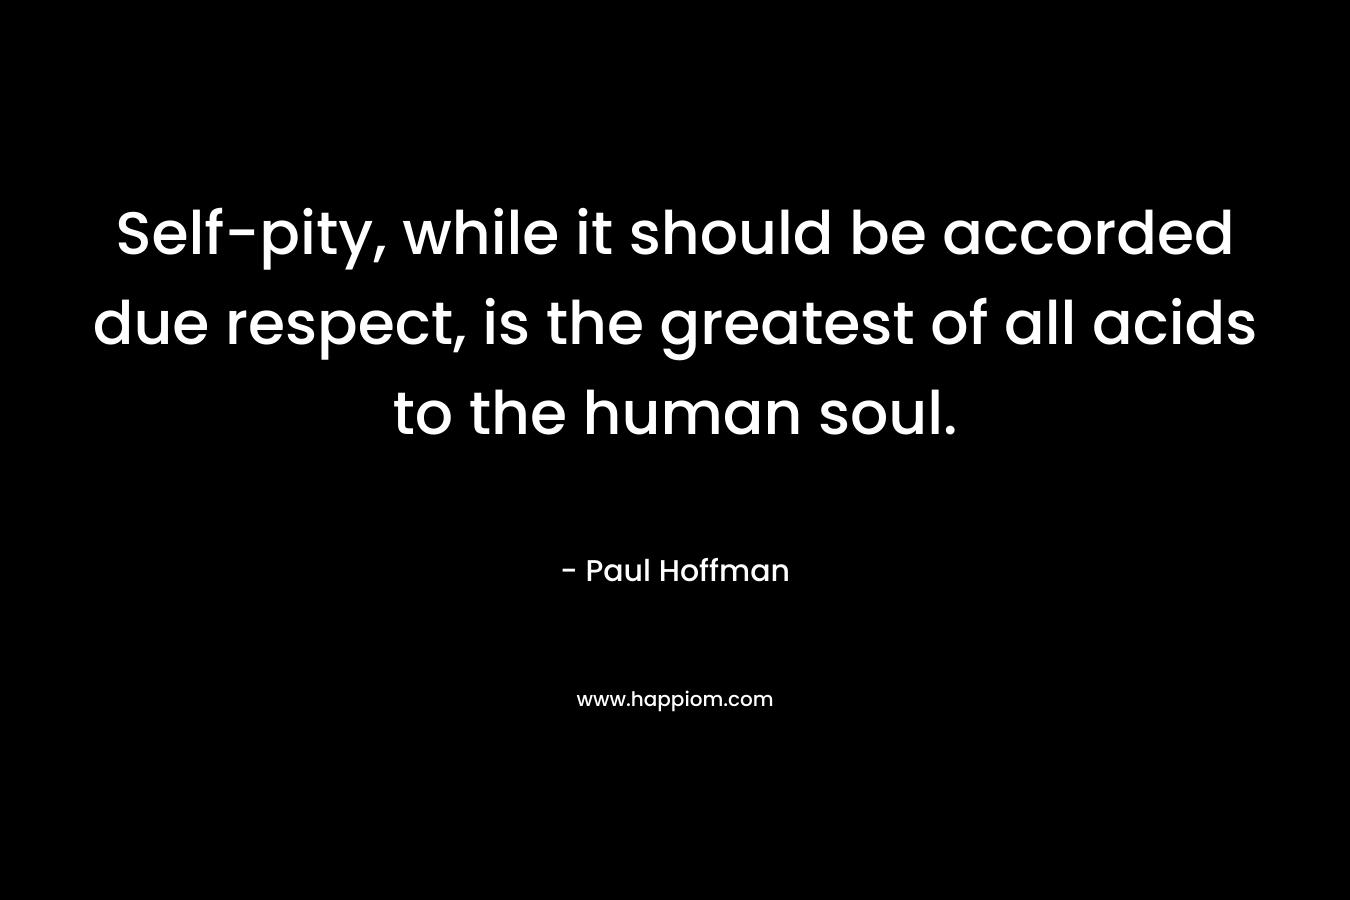 Self-pity, while it should be accorded due respect, is the greatest of all acids to the human soul.